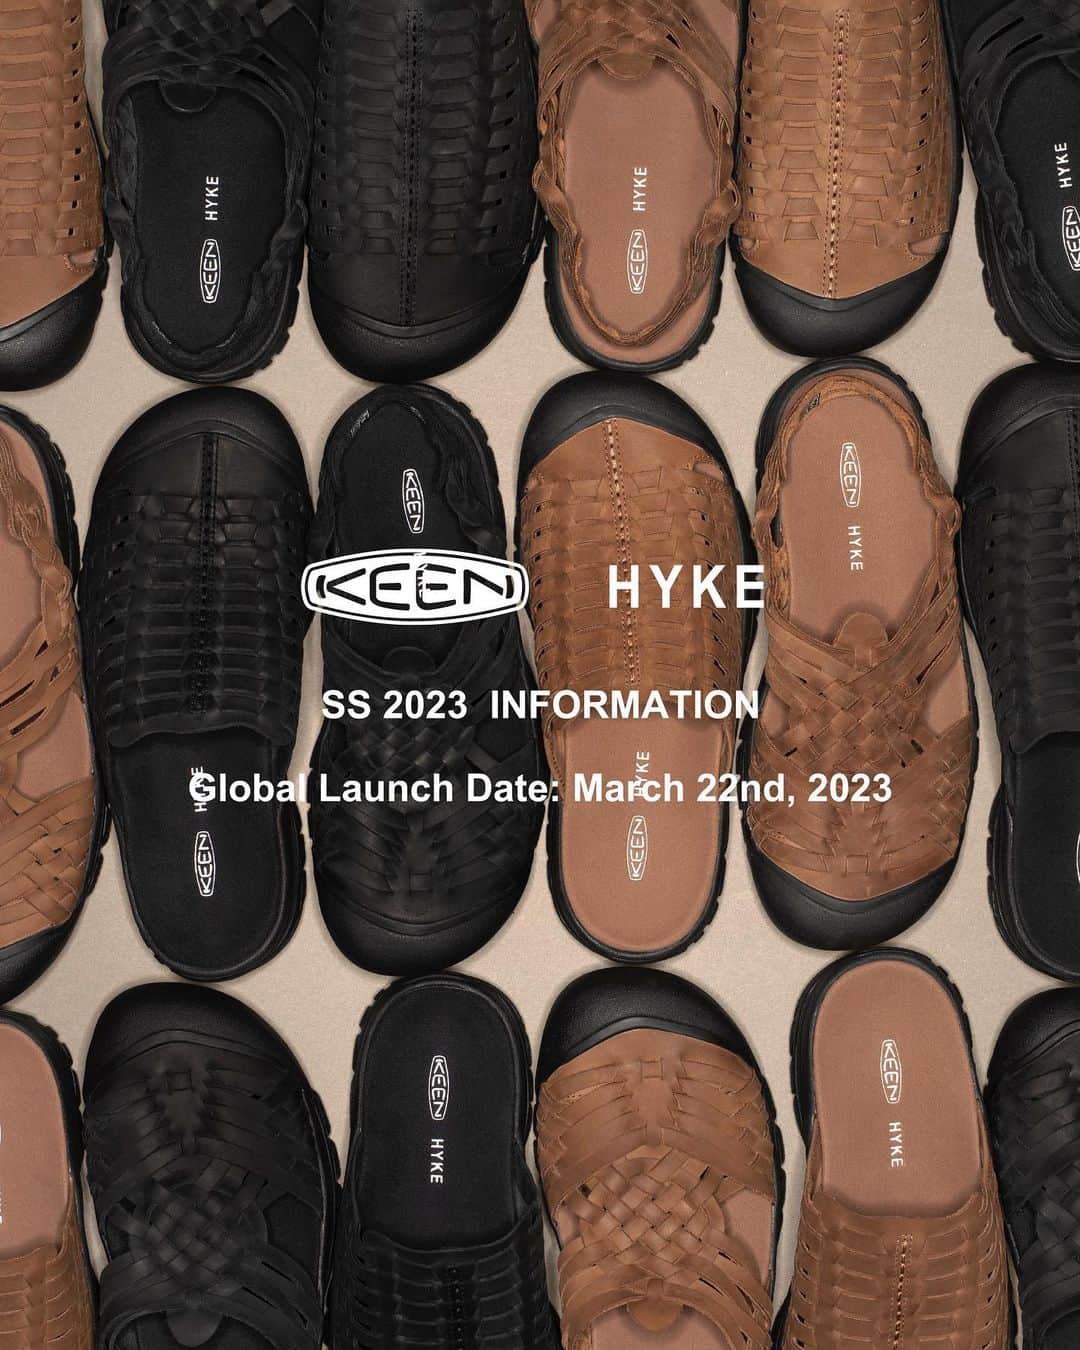 HYKEさんのインスタグラム写真 - (HYKEInstagram)「Global Launch Date: March 22nd, 2023 - ・KEEN EUROPE  OFFICIAL ONLINE STORE http://www.keenfootwear.com/de-de/ ・KEEN CHINA TMALL  OFFICIAL ONLINE STORE http://keenyd.tmall.com/shop/view_shop.htm?spm=a230r.1.14.4.4742519KFluQO&user_number_id=2081241306 ・KEEN CHINA JD  OFFICIAL ONLINE STORE http://mall.jd.com/index-761611.html?from=pc - - "KEEN× HYKE" SS 2023 COLLECTIONグローバル発売のご案内 - 下記日程にて"KEEN × HYKE" FW 2023 COLLECTIONがグローバルで発売解禁となります。 発売解禁日 : 2023年3月22日 水曜日 - 発売日、販売方法に関しては取扱店舗により異なりますので、販売店舗に直接 お問い合わせください。 - @keen @keen_japan #keenhyke #keen #hyke」3月21日 12時30分 - hyke_official